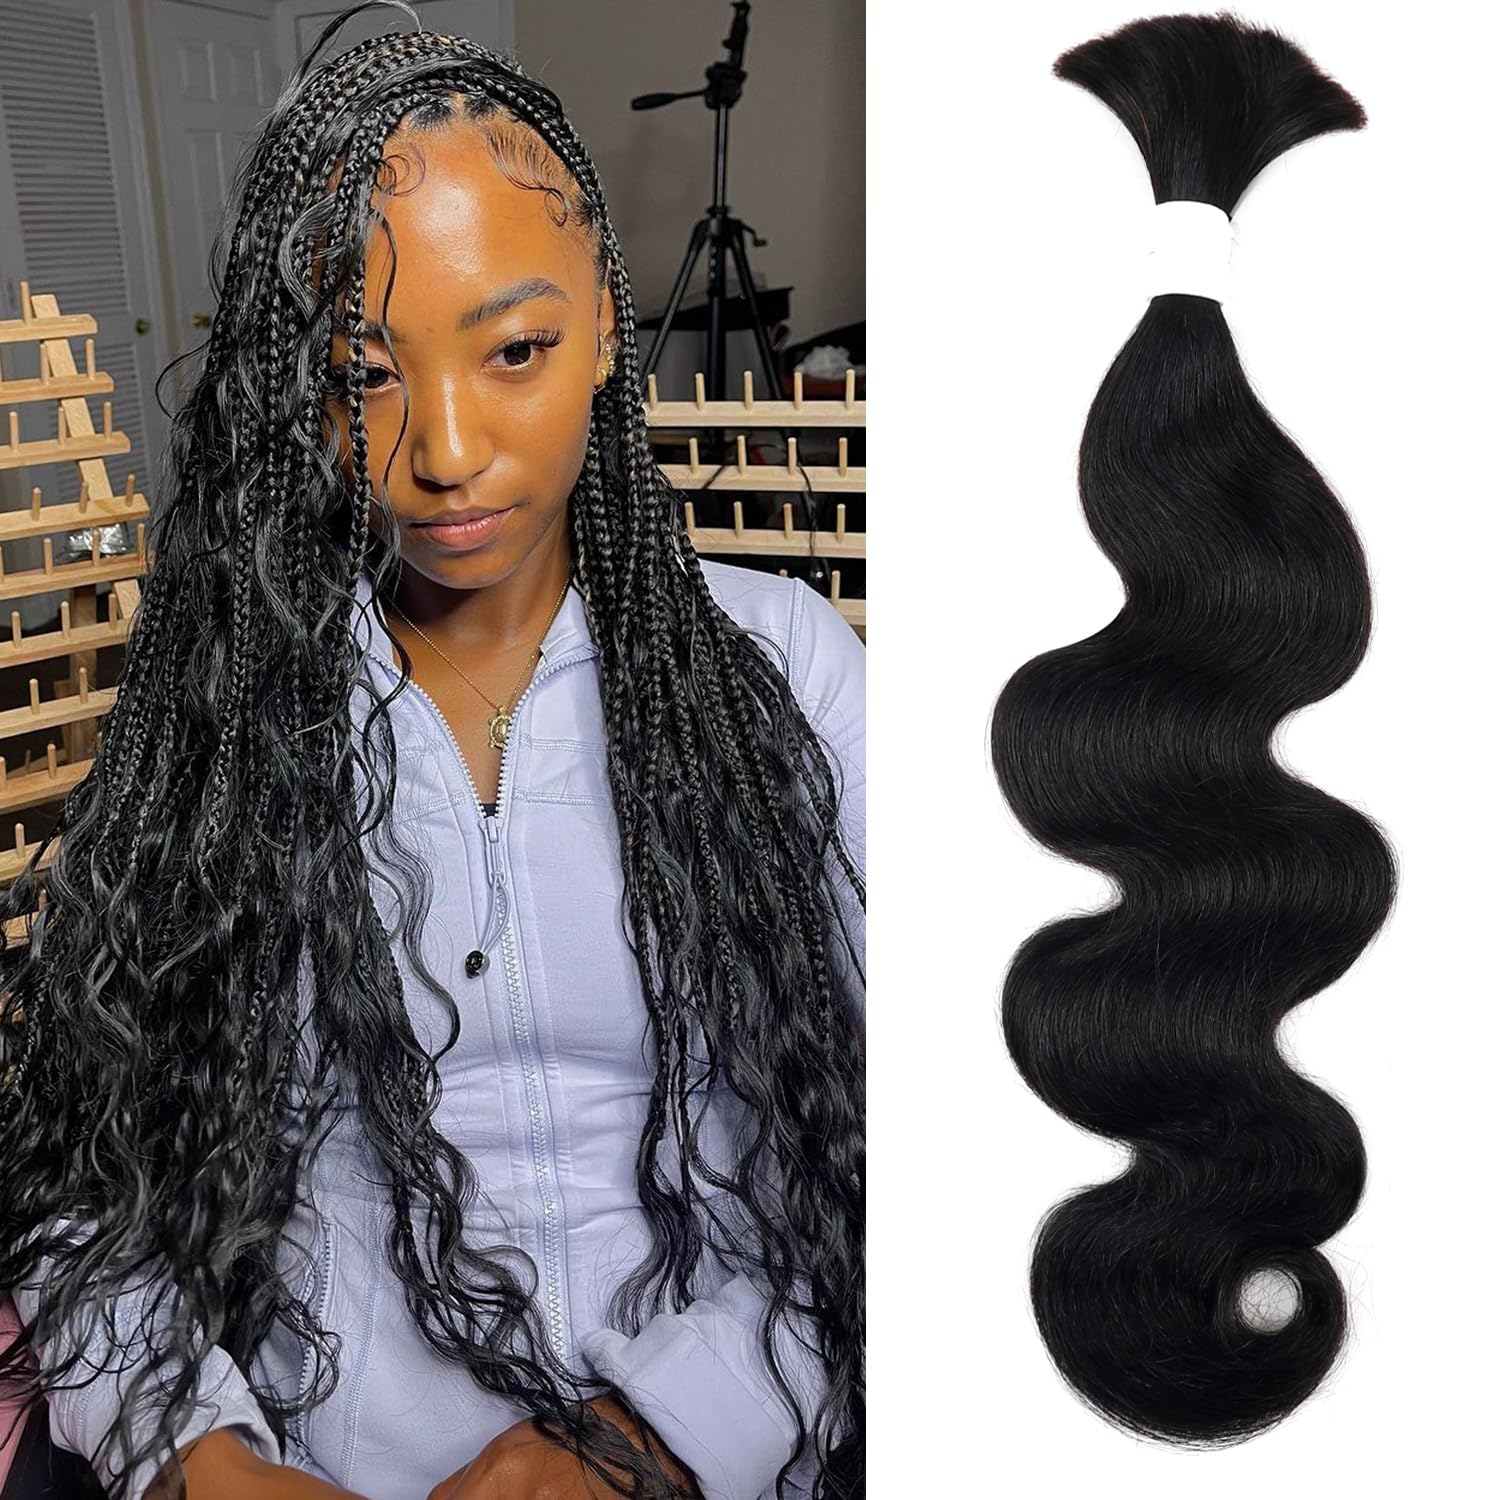 Toyoytress Human Braiding Hair 50g One Bundle/Pack 20 Inch Body Wave Human Hair for Braiding No Weft 100% Unprocessed Brazilian Remy Human Hair Extensions for Boho Braids Wet and Wavy